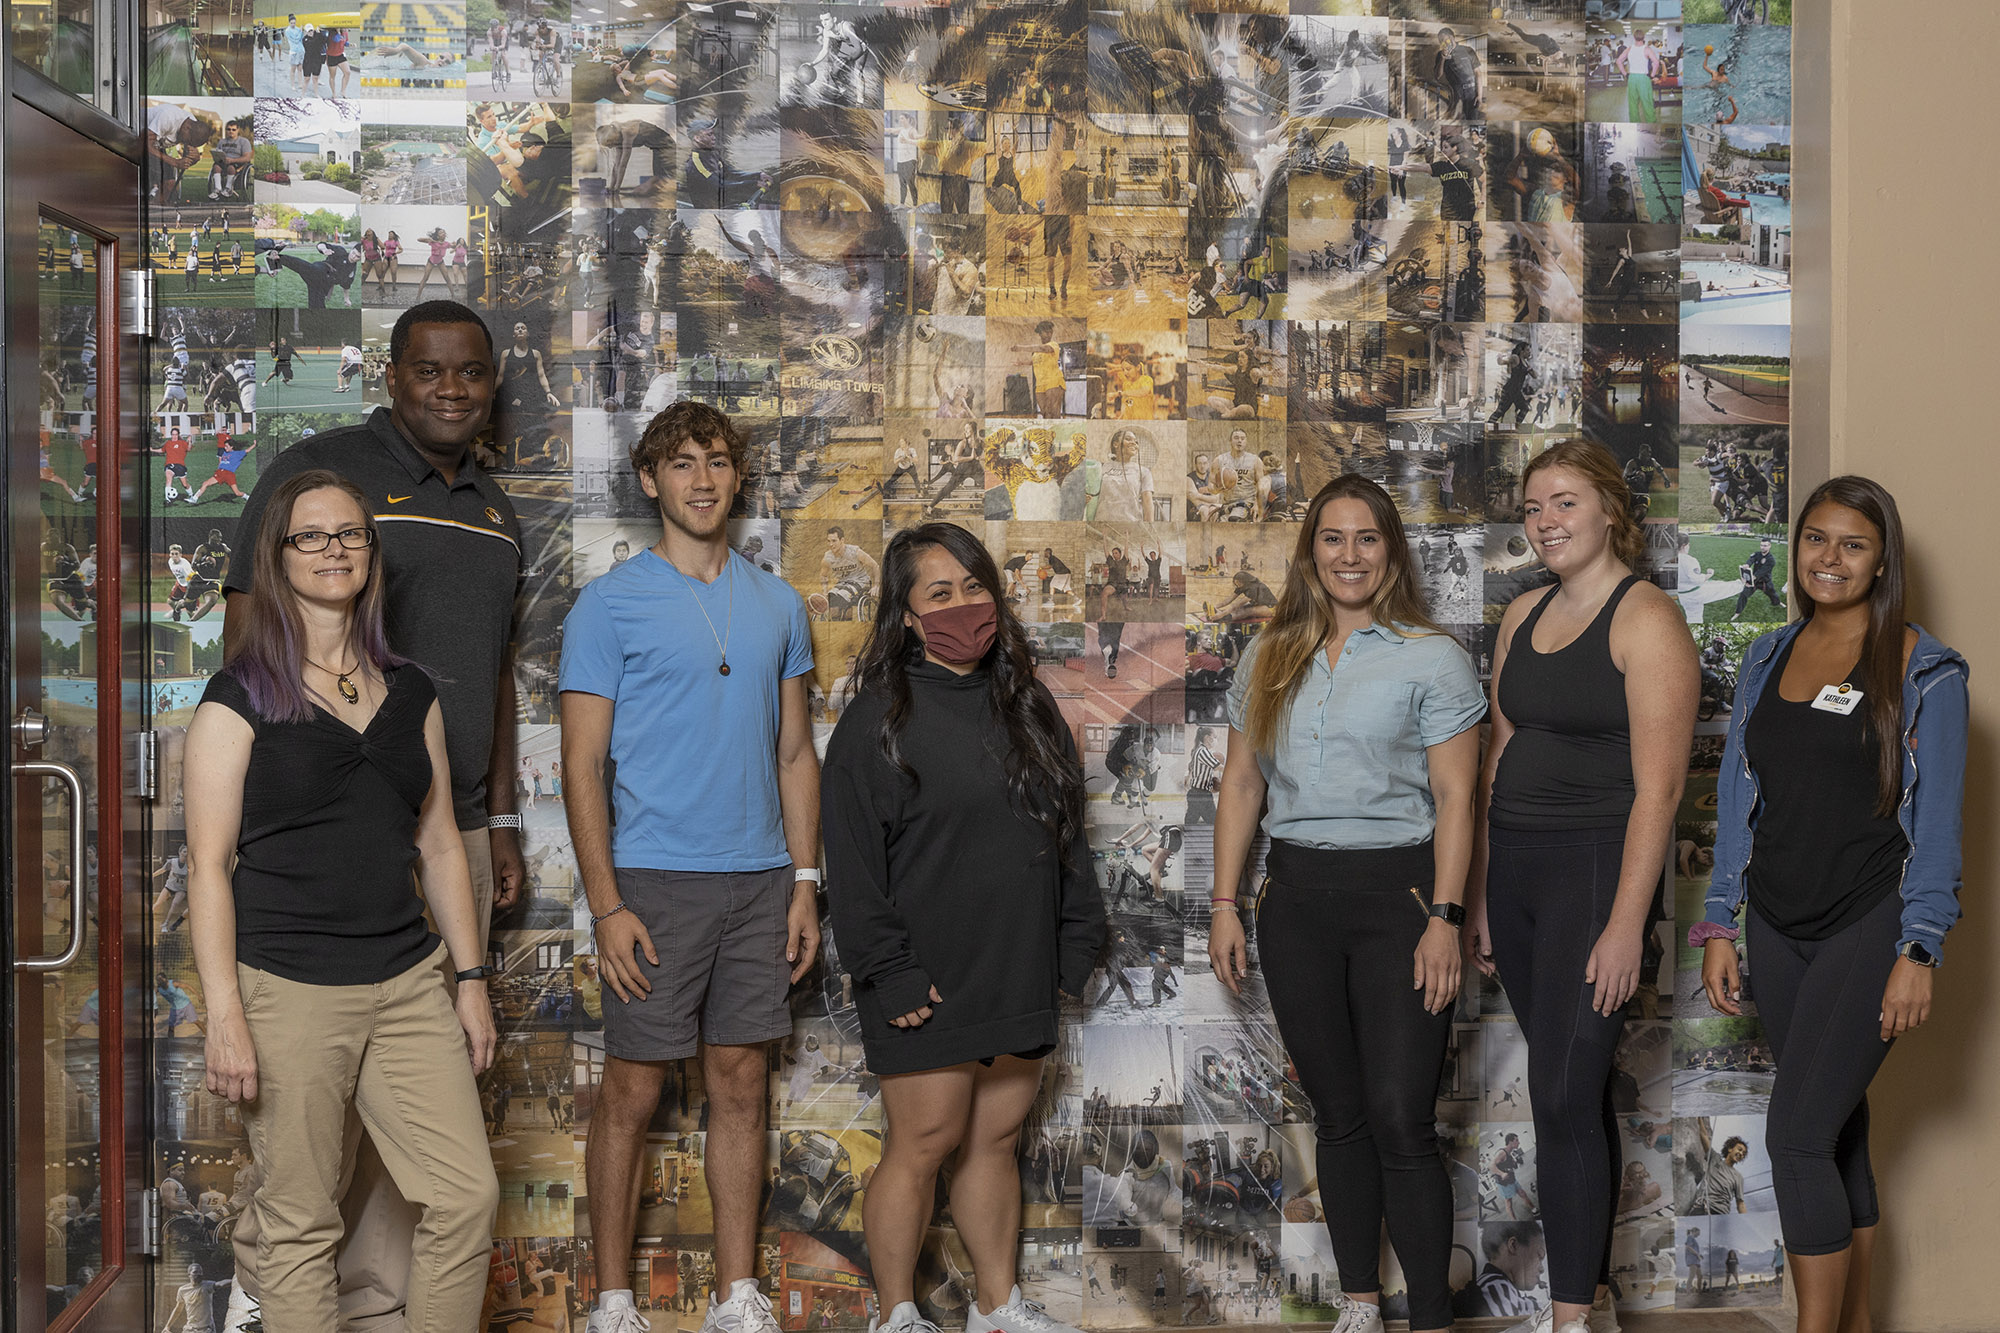 Division of Student Affairs employees and MizzouRec student staff pose in front of the tiger mosaic art installation in the MizzouRec